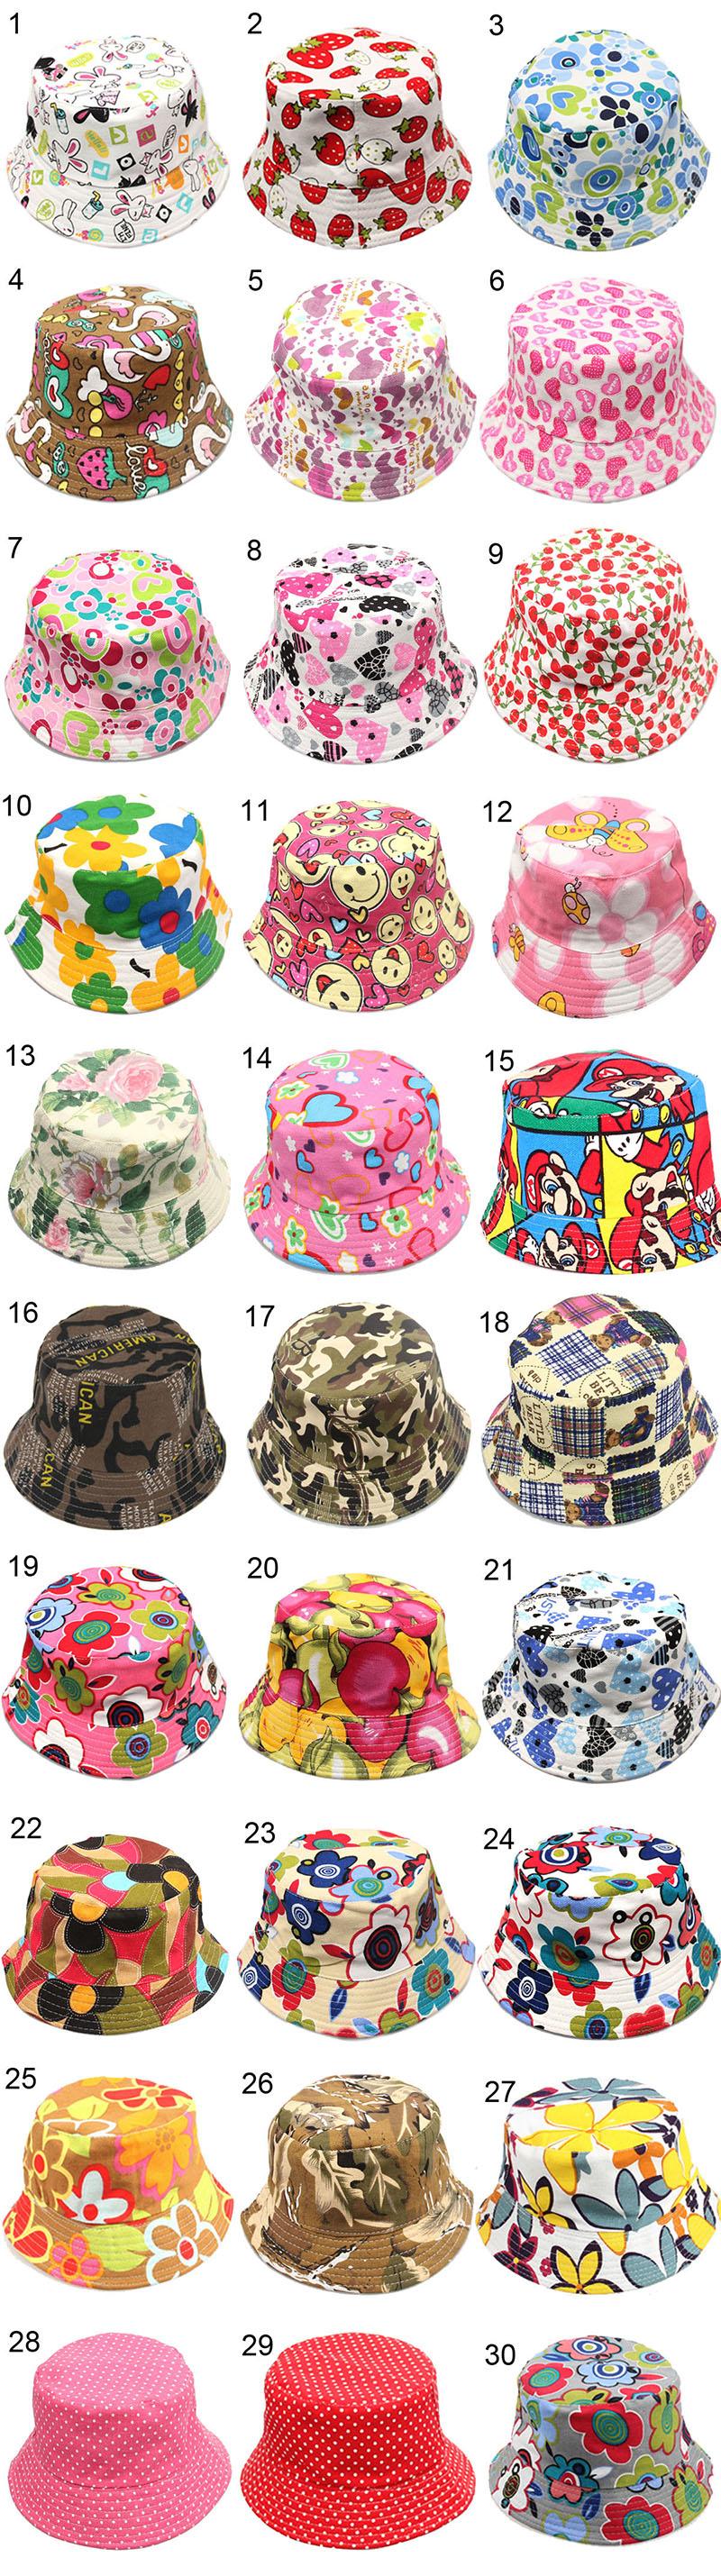 Children Bucket Hat 30 Colors Casual Flowers Printed Basin Canvas Topee Kids Hats Baby Beanie Caps 2-5T